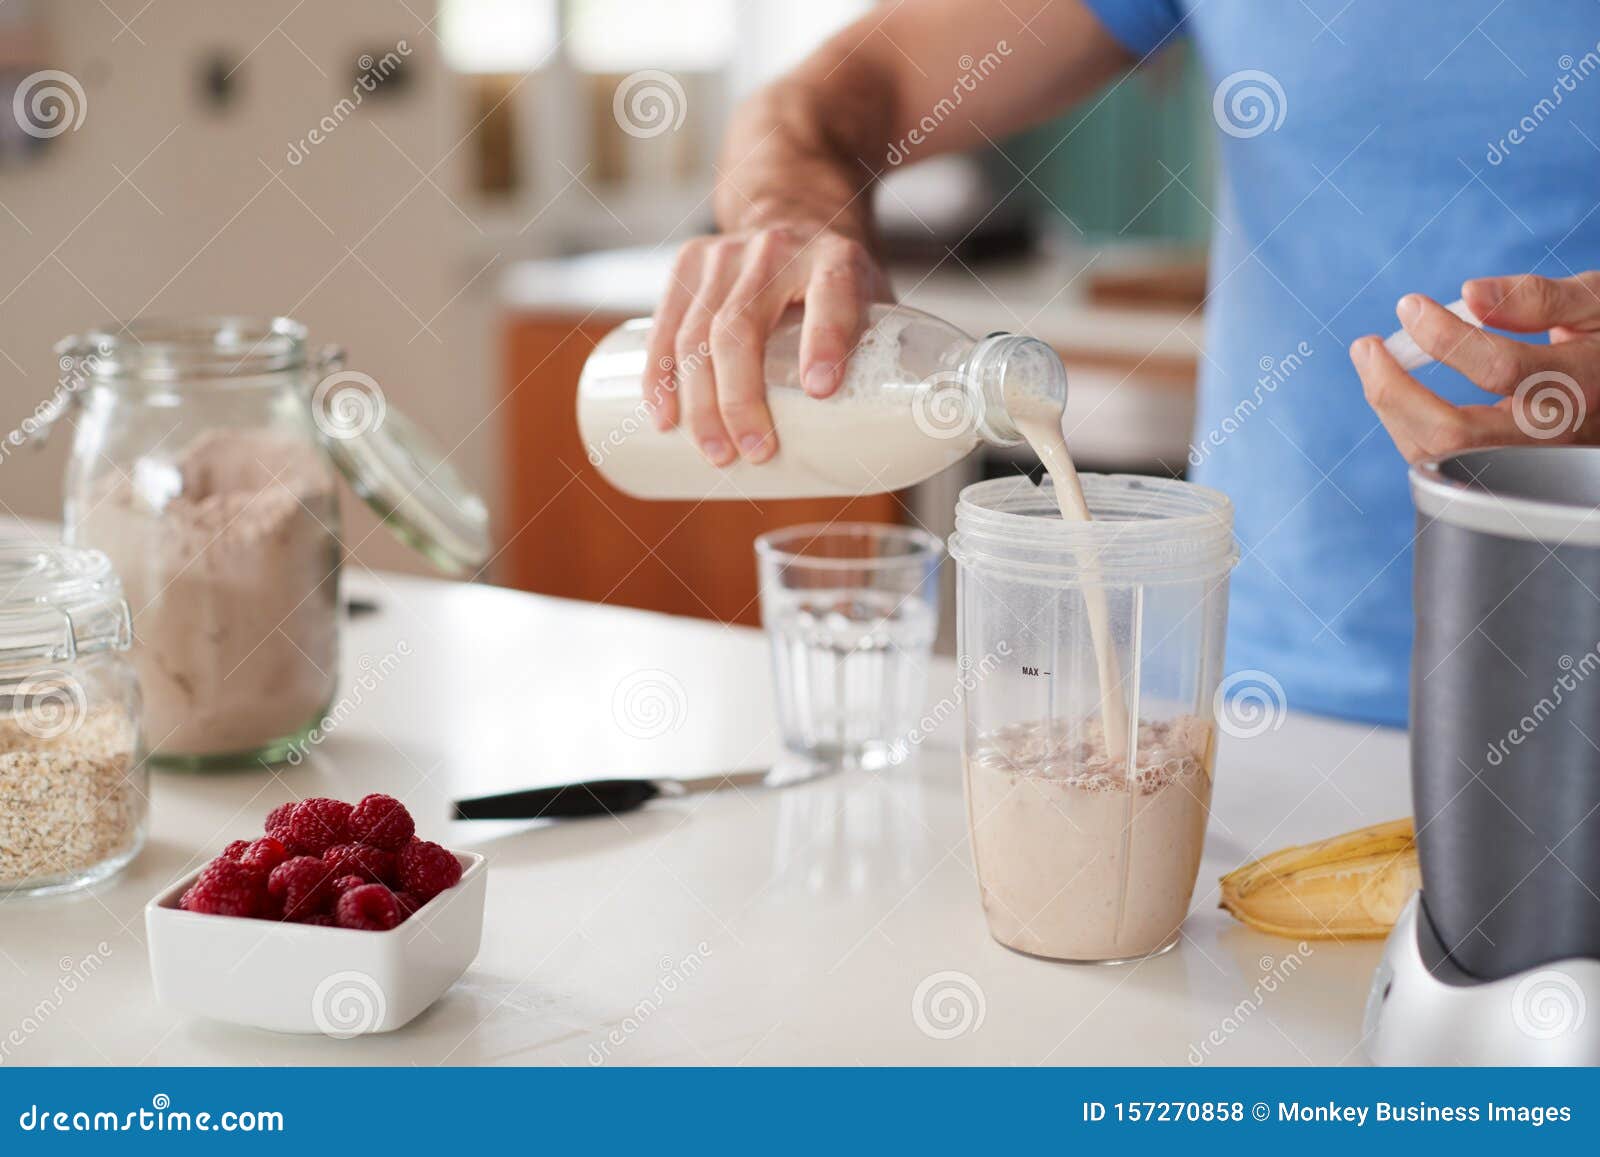 close up of man making protein shake after exercise at home